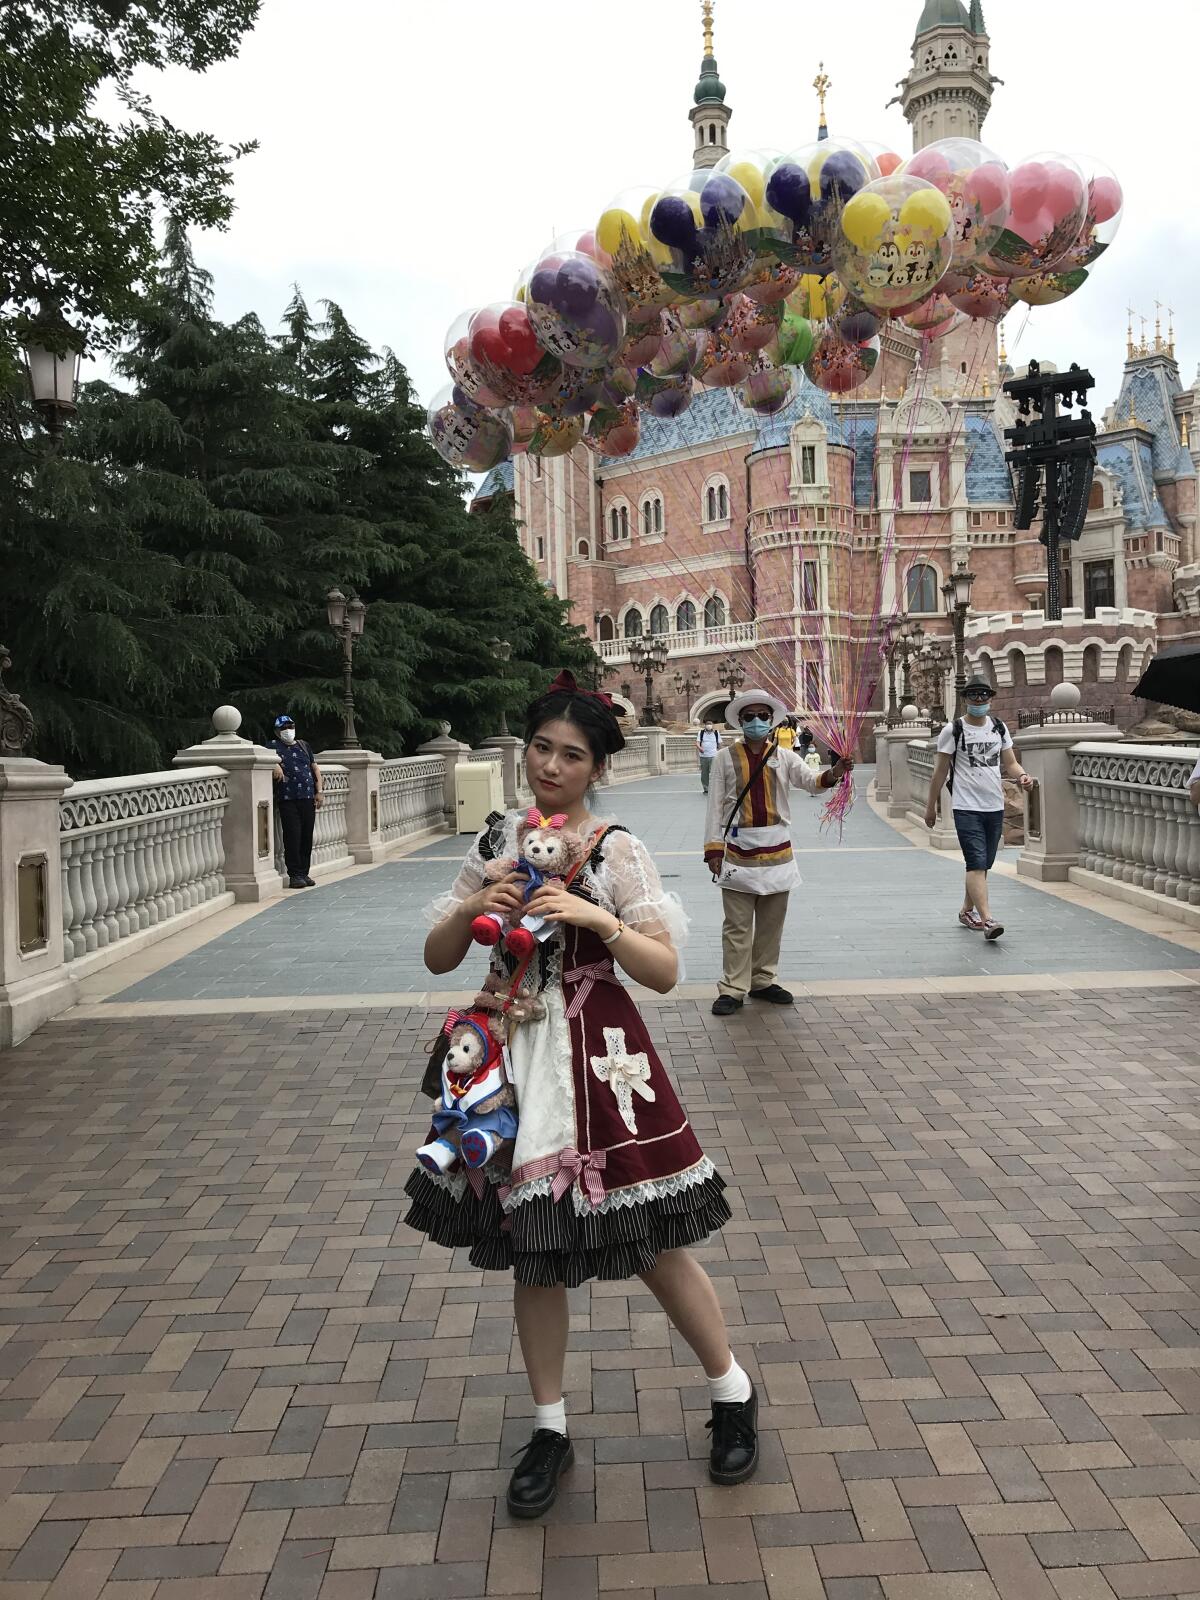 Fan Shuqian, 24, said she bought this dress from Japan to wear for photos in Disneyland.